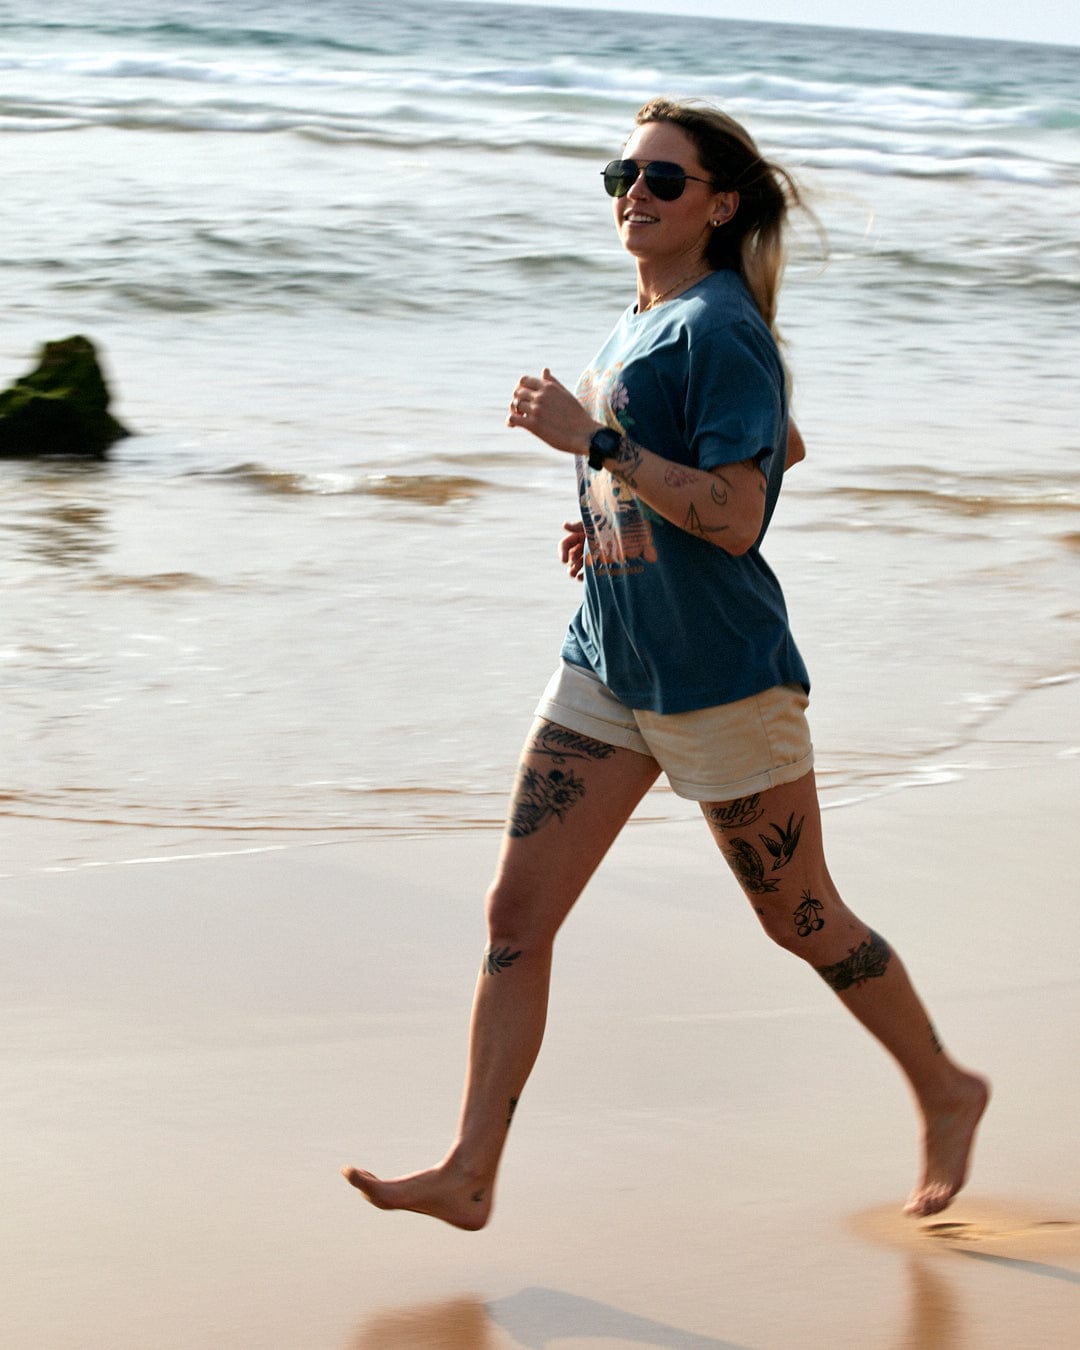 A woman with tattoos running joyfully on a beach, wearing a Saltrock Better Days - Recycled Womens Short Sleeve Relaxed T-Shirt in Teal and shorts, with sunglasses on a sunny day.